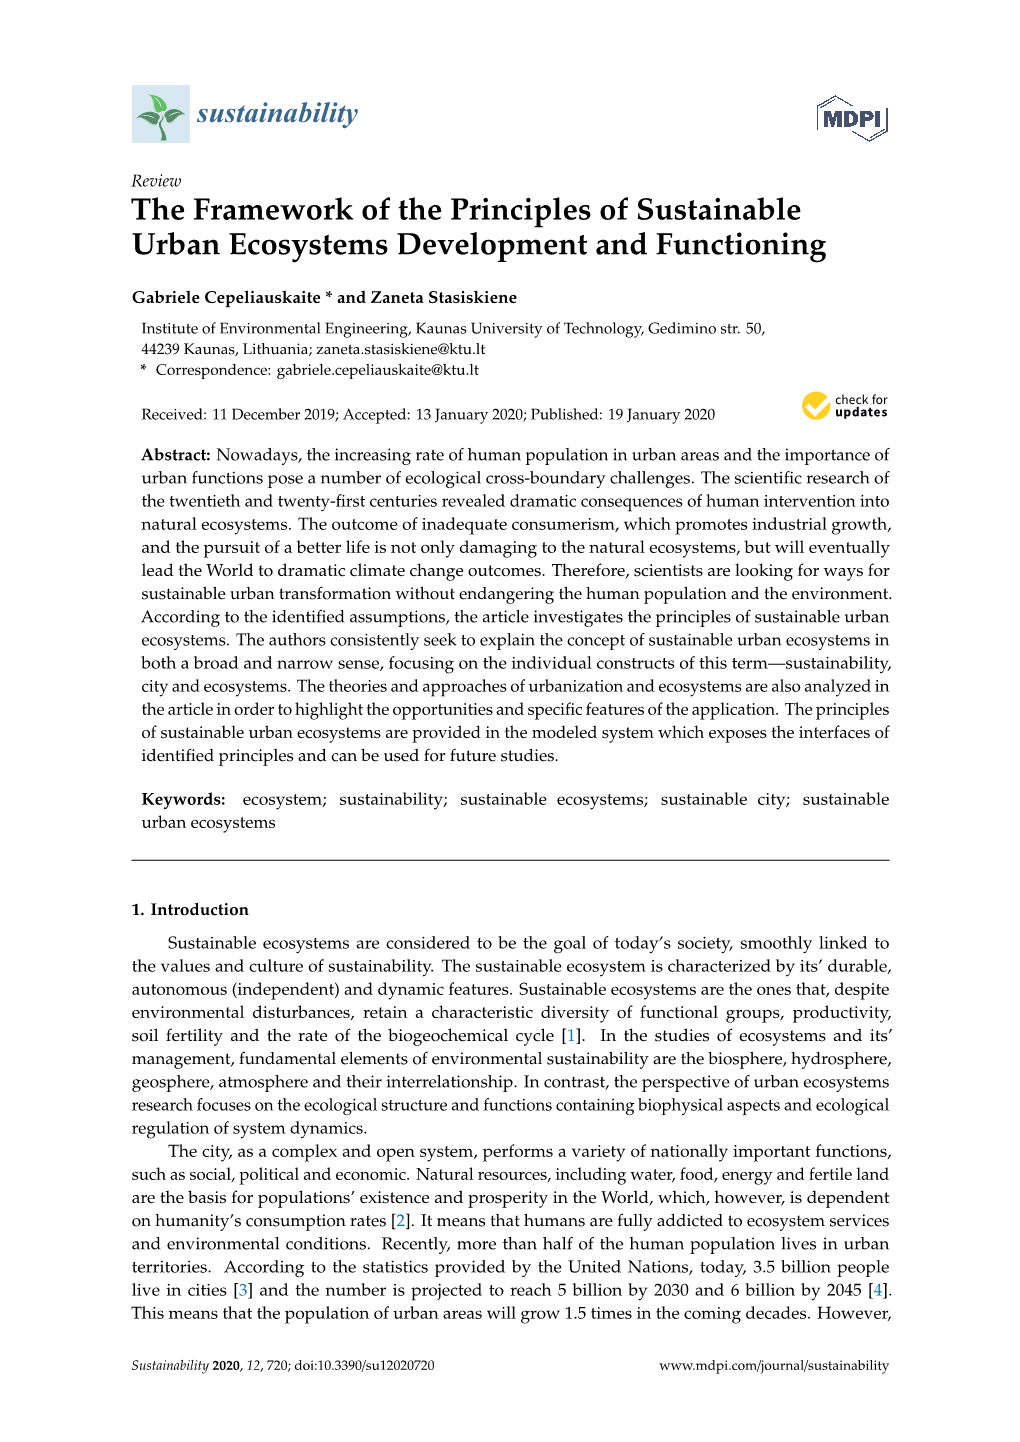 The Framework of the Principles of Sustainable Urban Ecosystems Development and Functioning